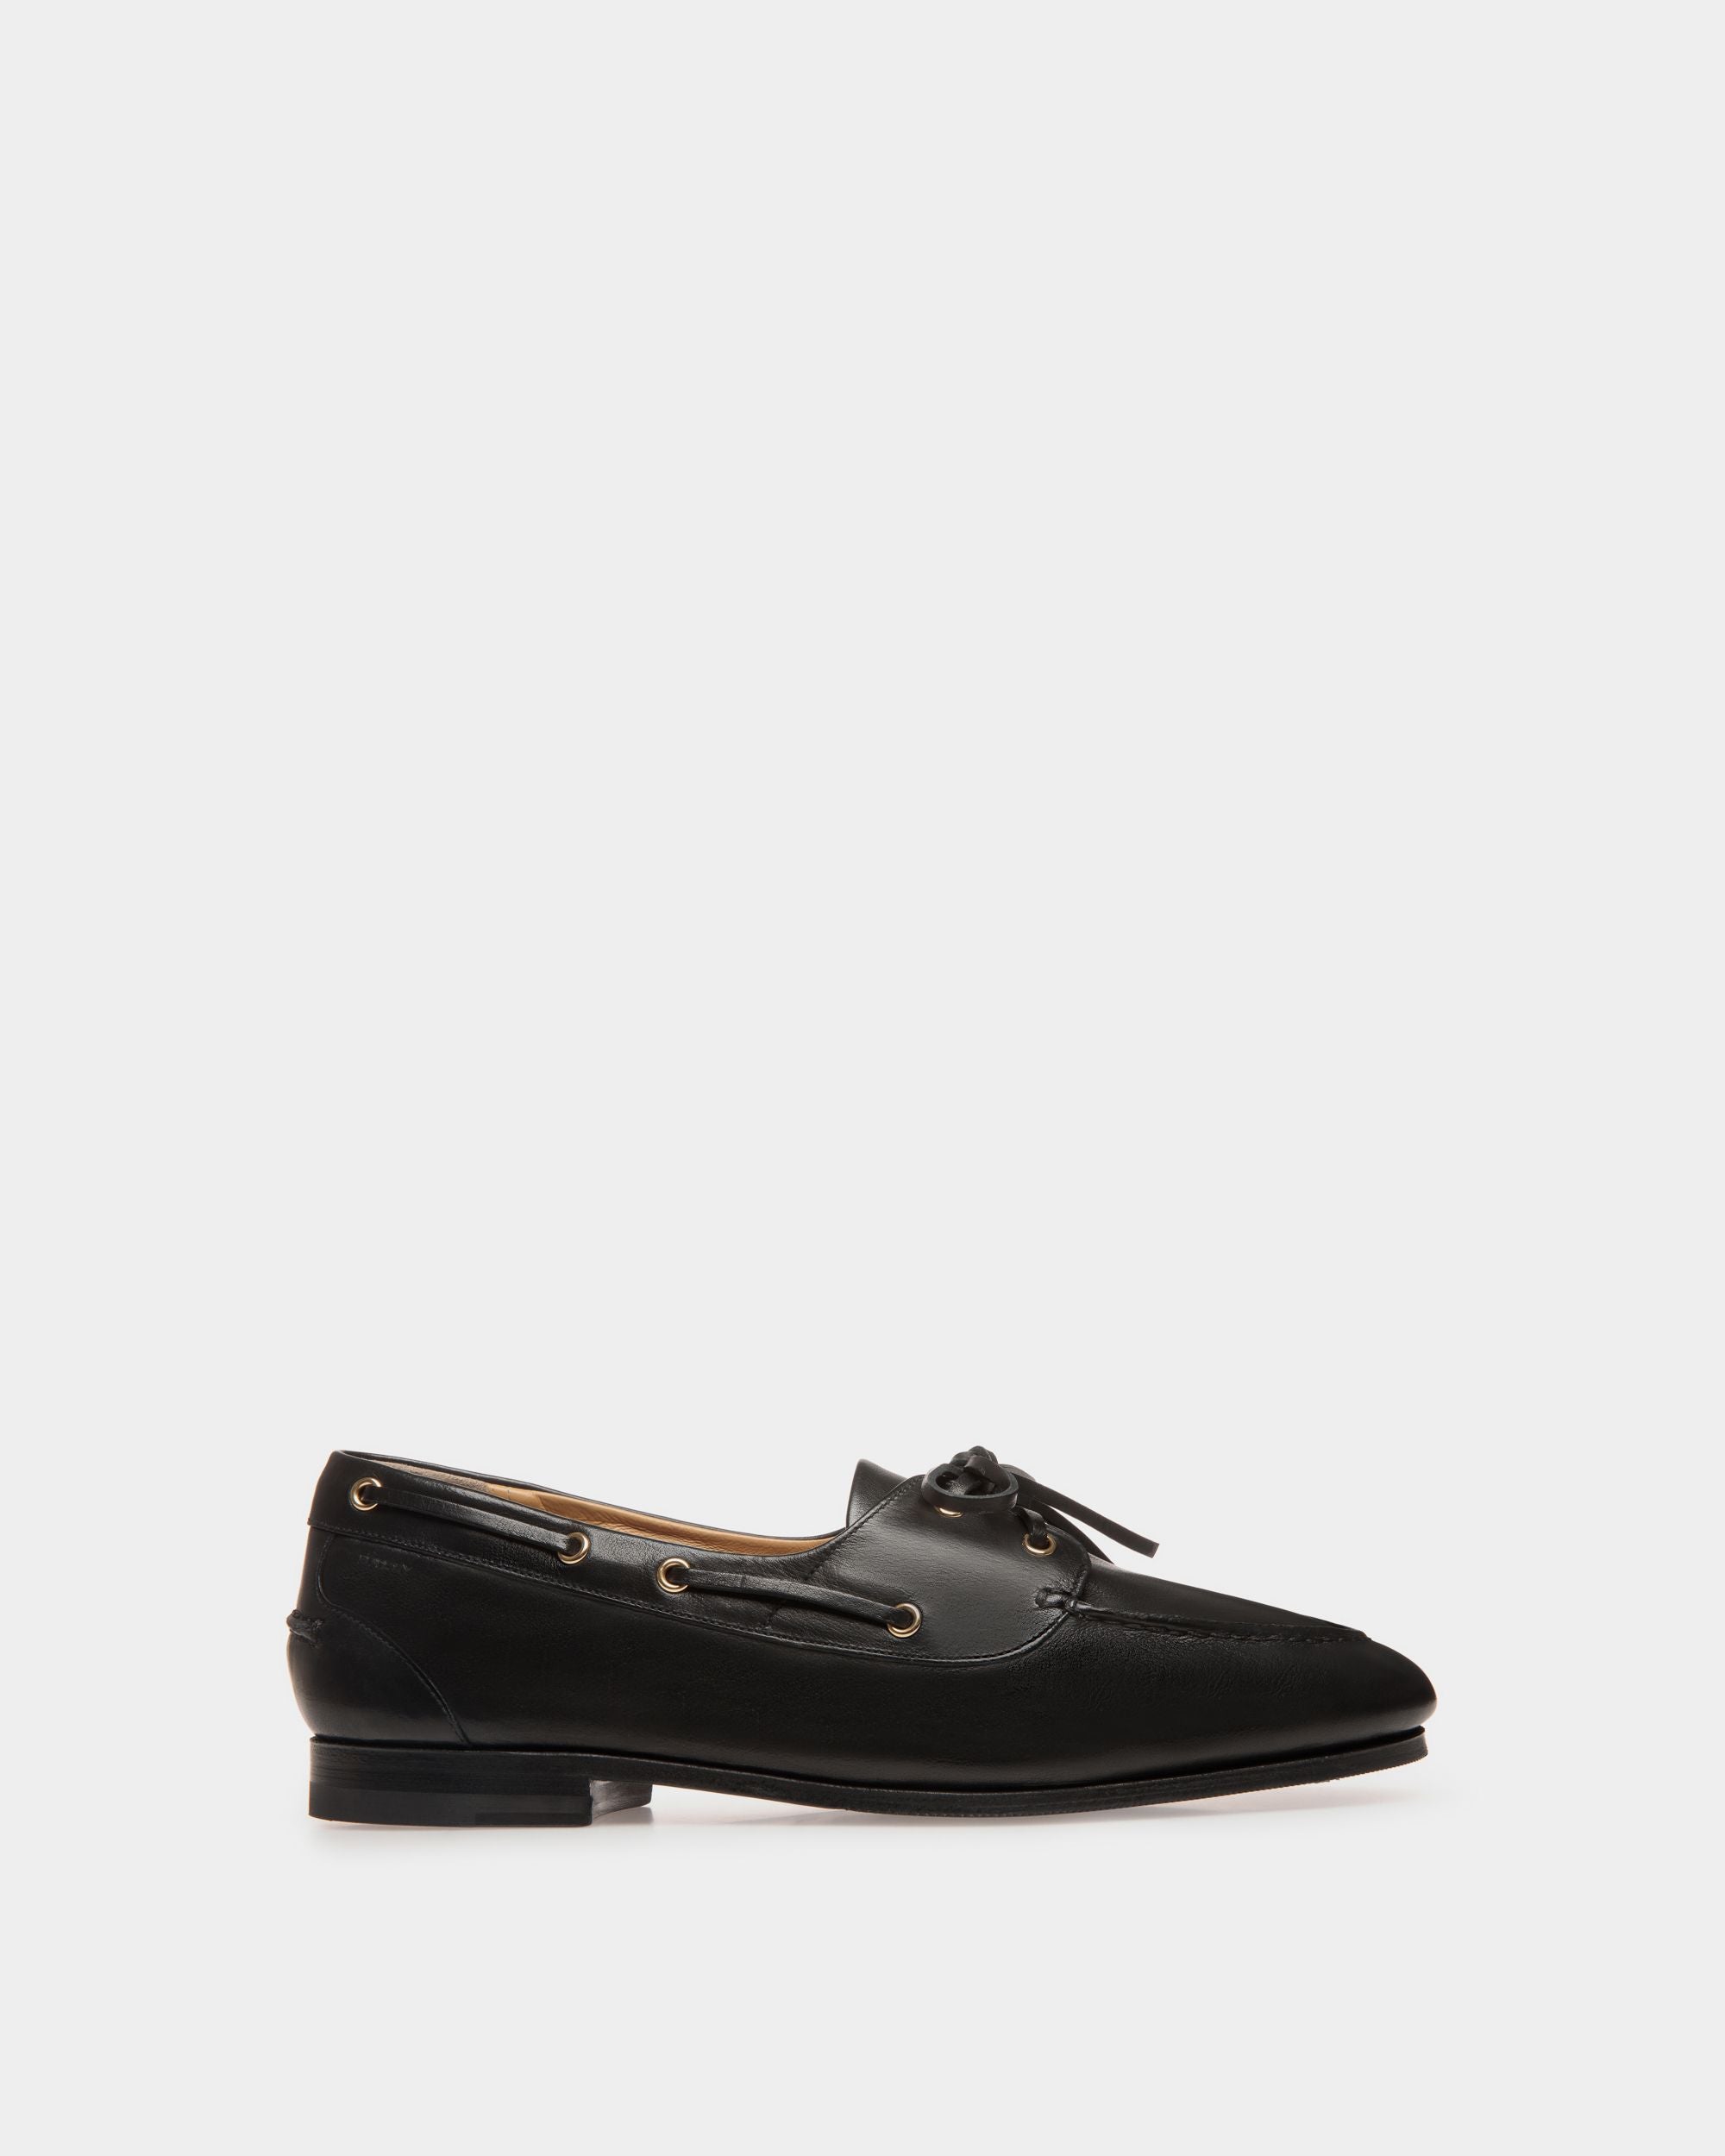 Plume | Men's Moccasin in Black Leather| Bally | Still Life Side